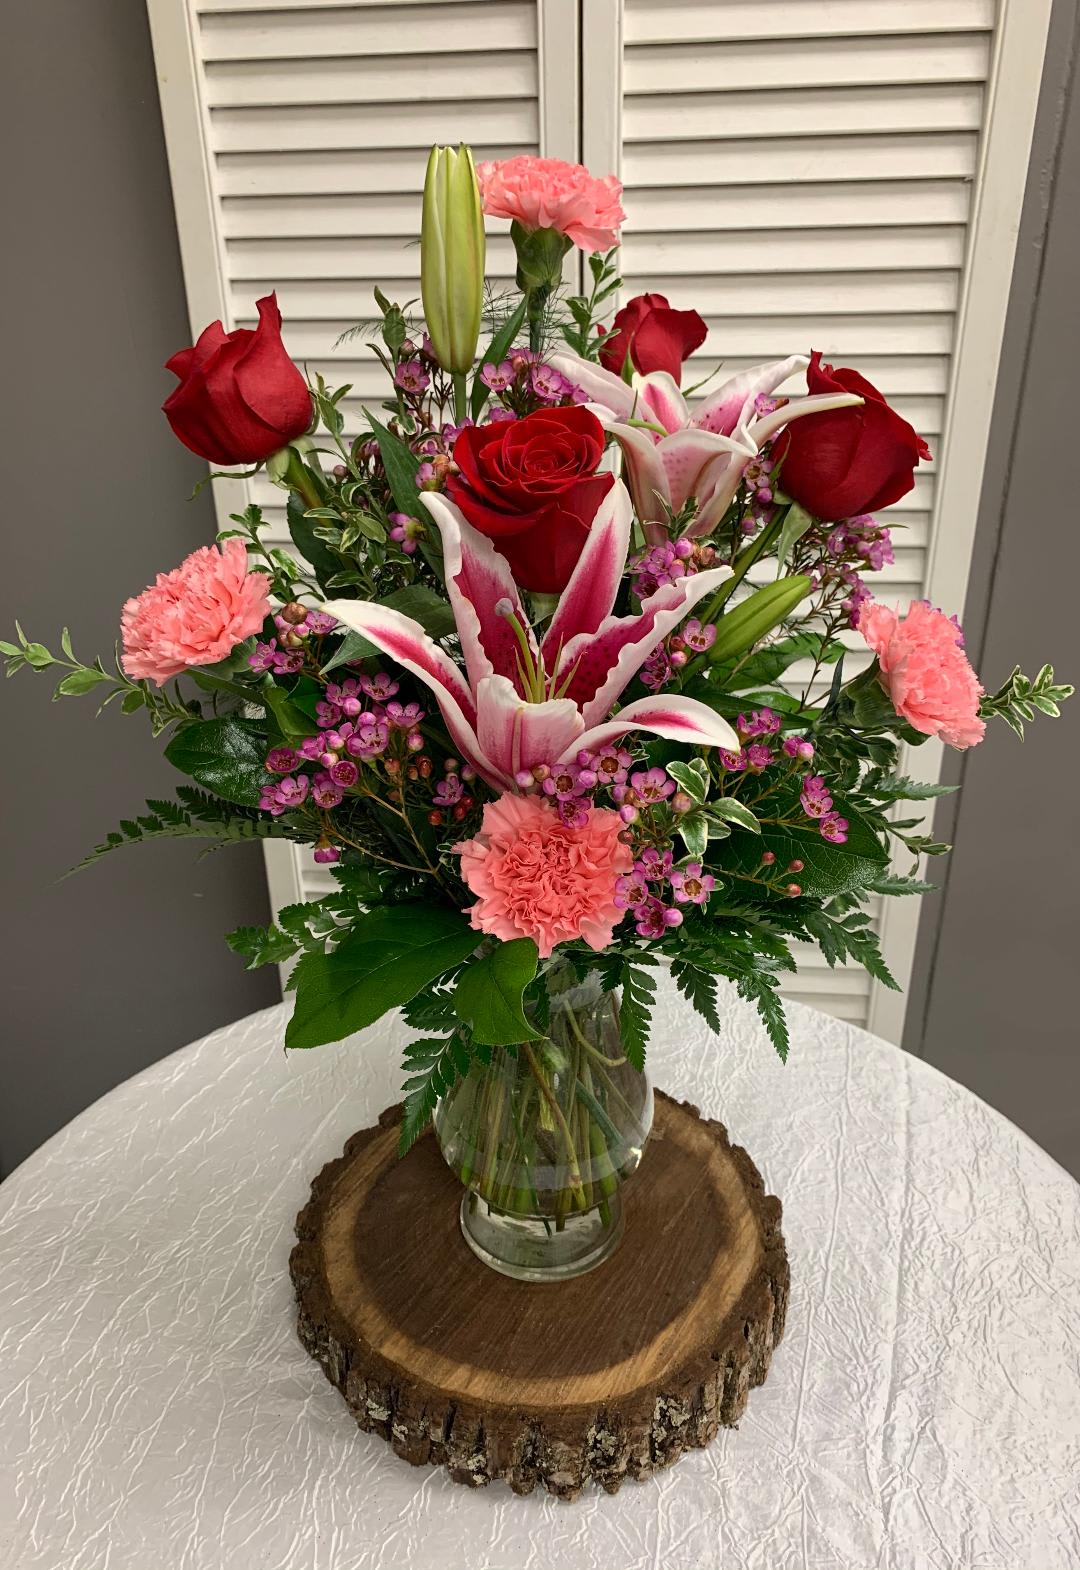 I Adore You Arrangement - This arrangement includes Red Roses, Stargazer Lily, Pink Carnations and Wax Flower. Lily color may vary from photo.